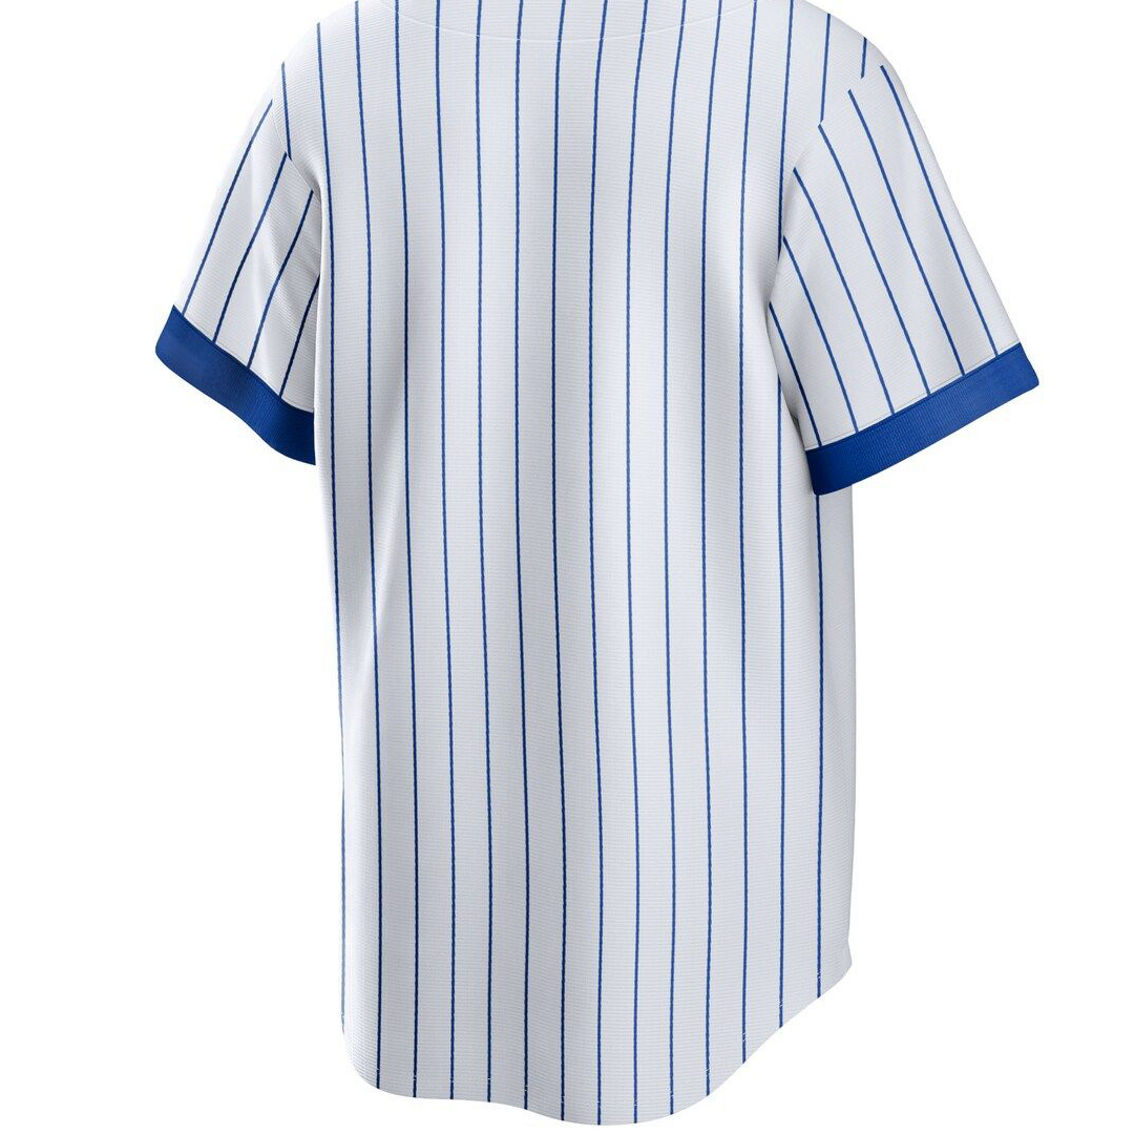 Nike Men's White Chicago Cubs Home Cooperstown Collection Team Jersey - Image 4 of 4